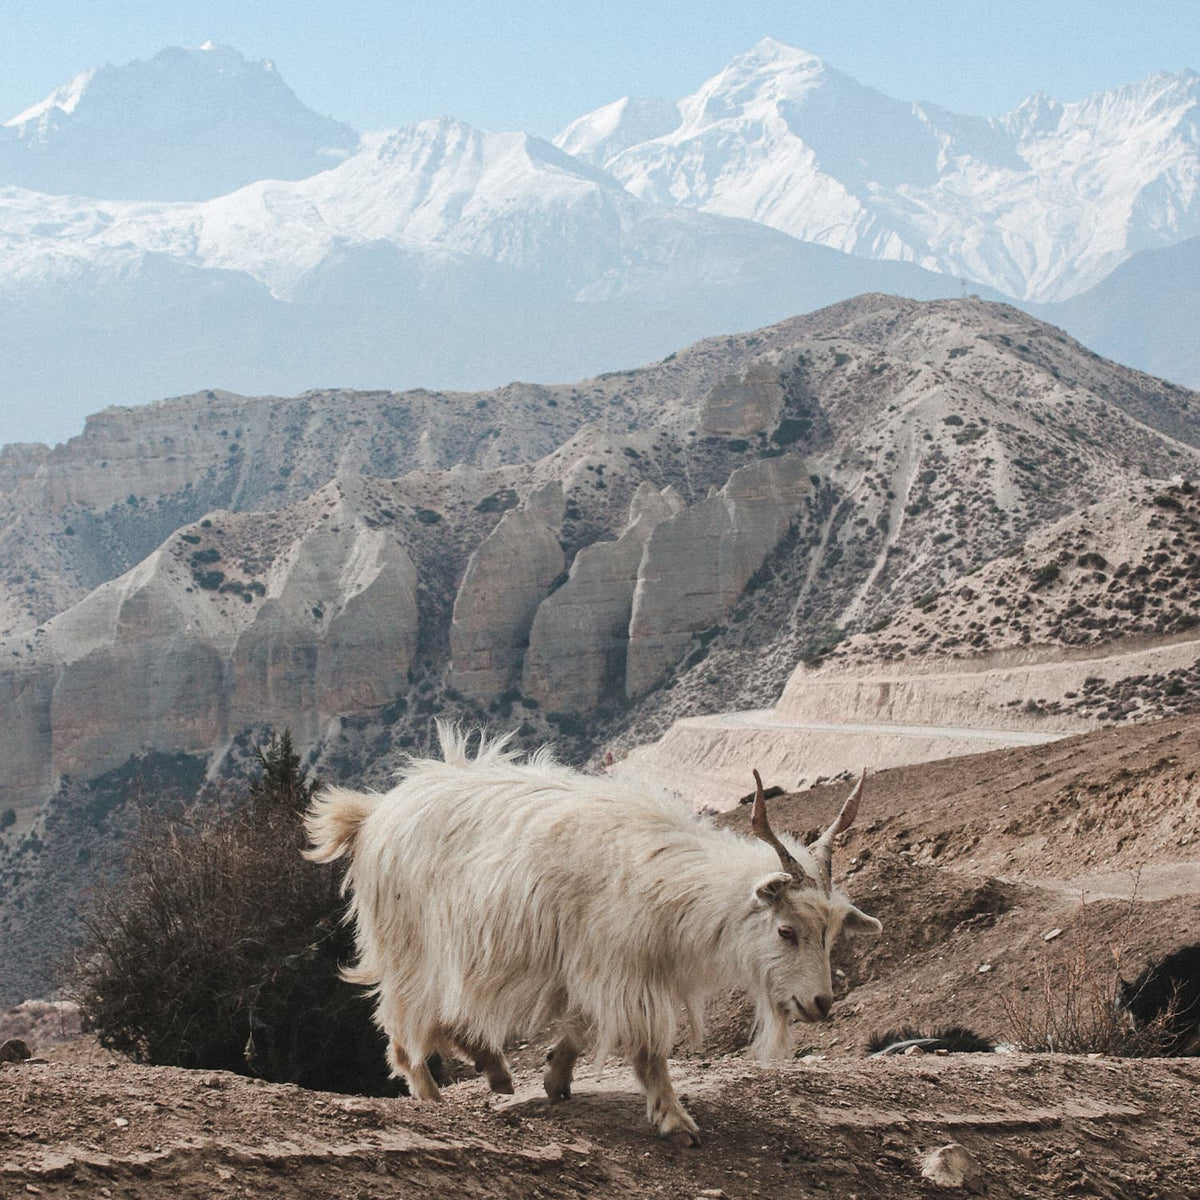 Cashmere - Where does the noblest wool in the world come from?